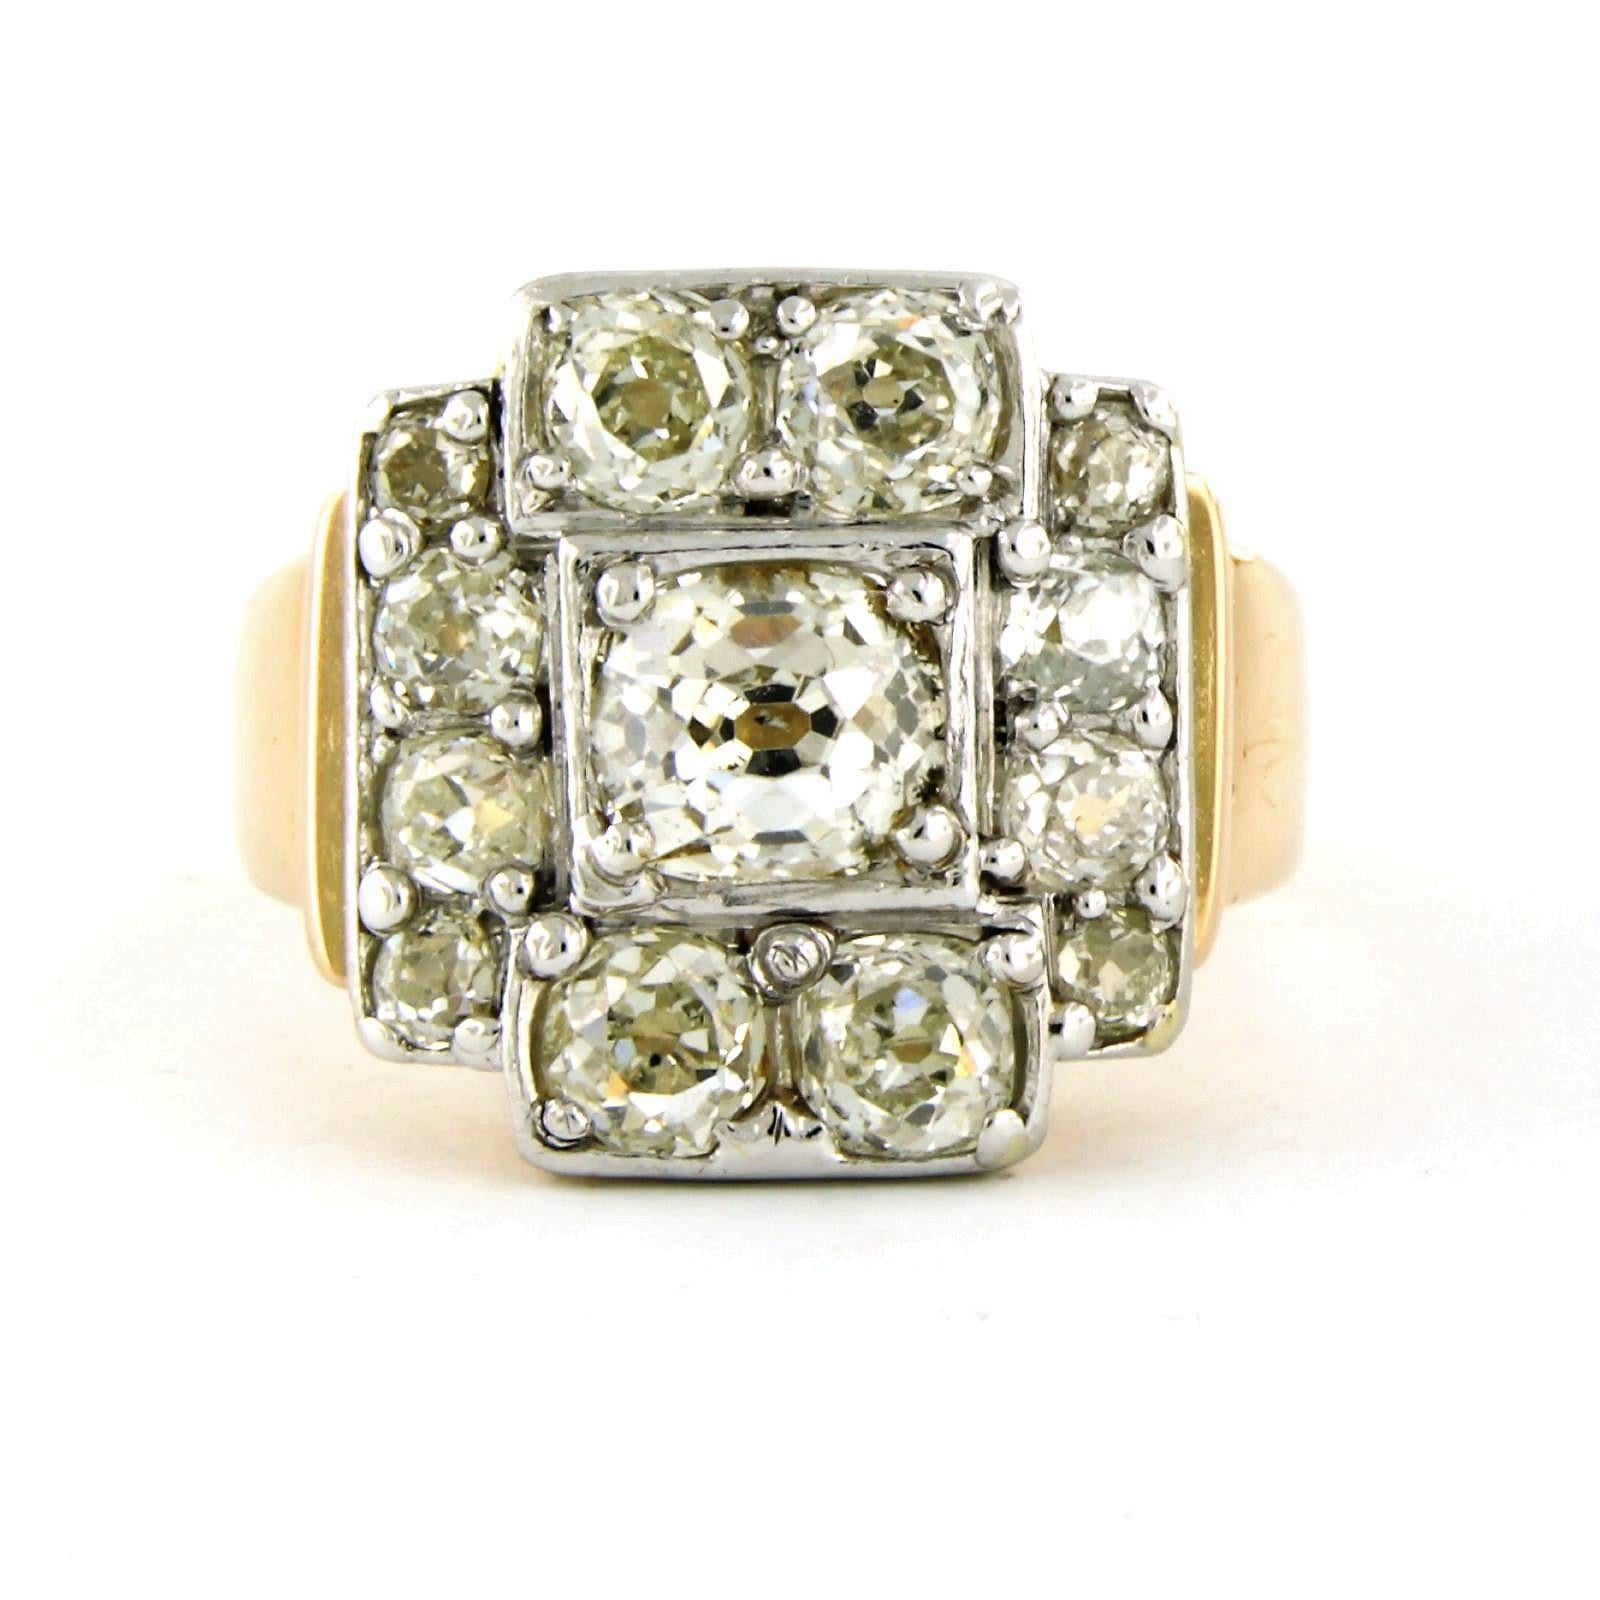 18k gold with platina ring set with old mine cut diamonds total approx. 2.60 carat K/L - SI/P - ringsize U.S. 7.25 - EU 17.5 (55)

Detailed description

The top of the ring is 1.7 cm wide.

Ringsize  U.S. 7.25 - EU 17.5 (55). The ring can be